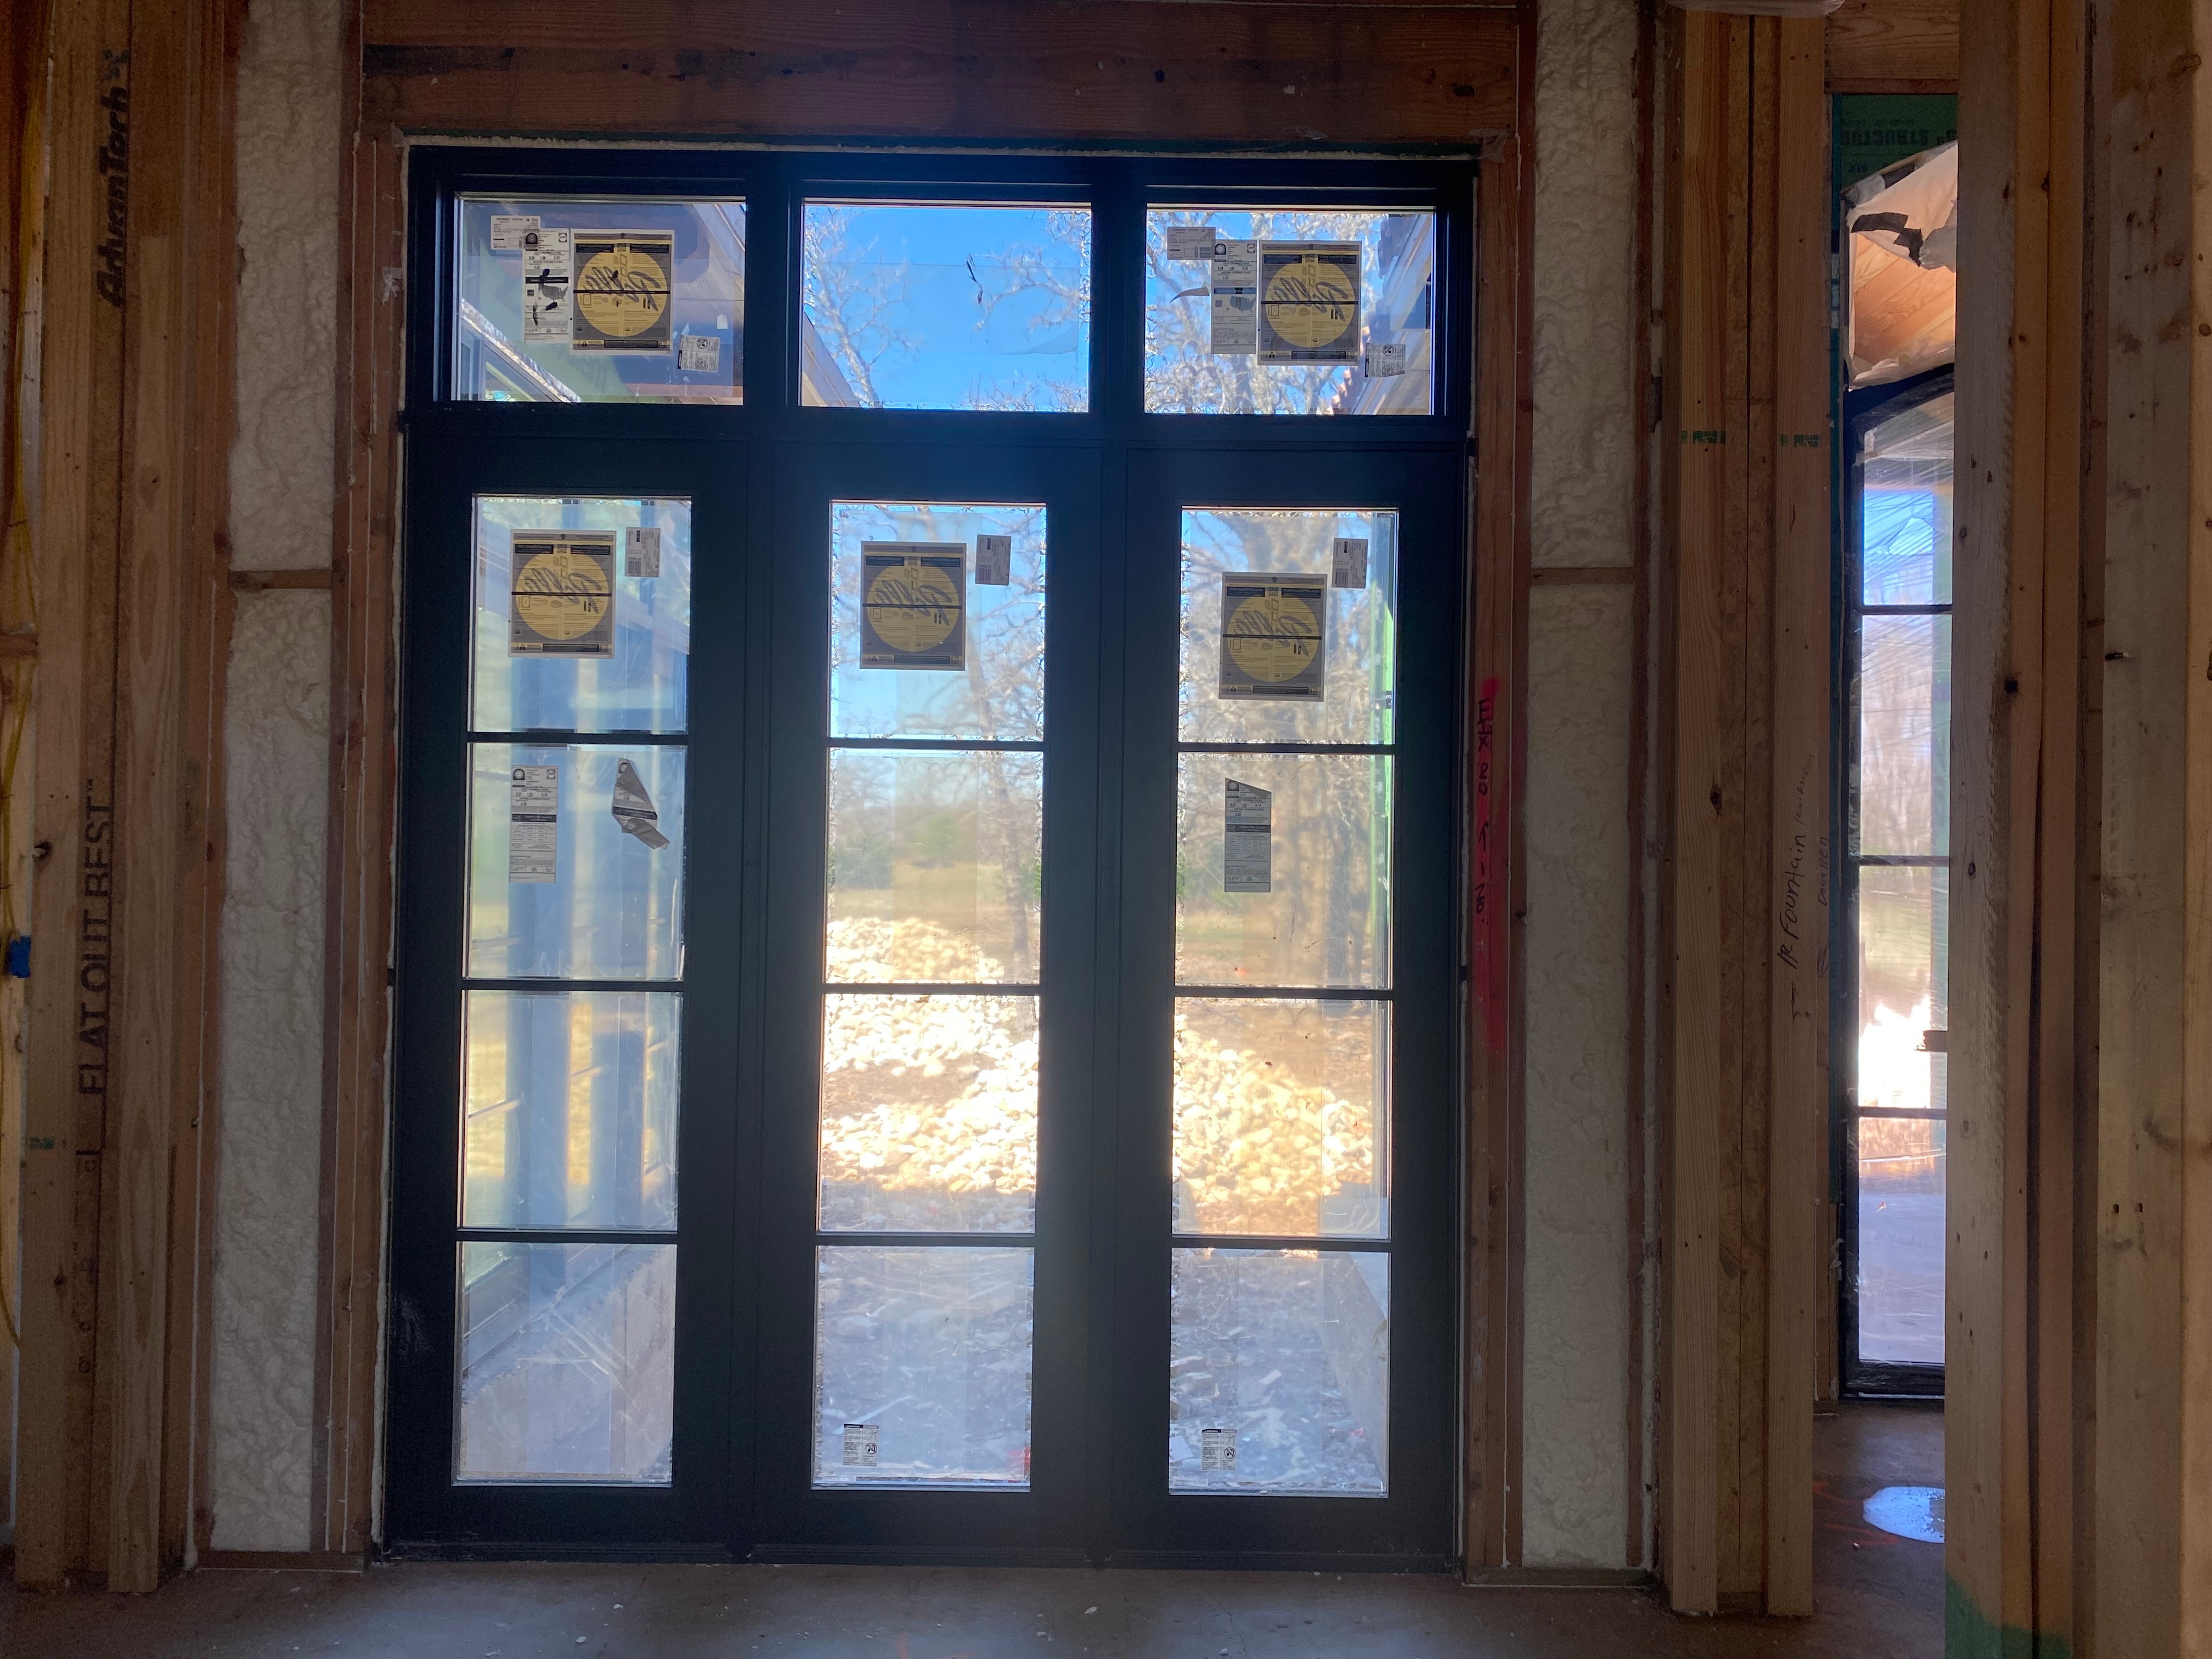 Hinged patio doors and awning windows on new construction in Austin